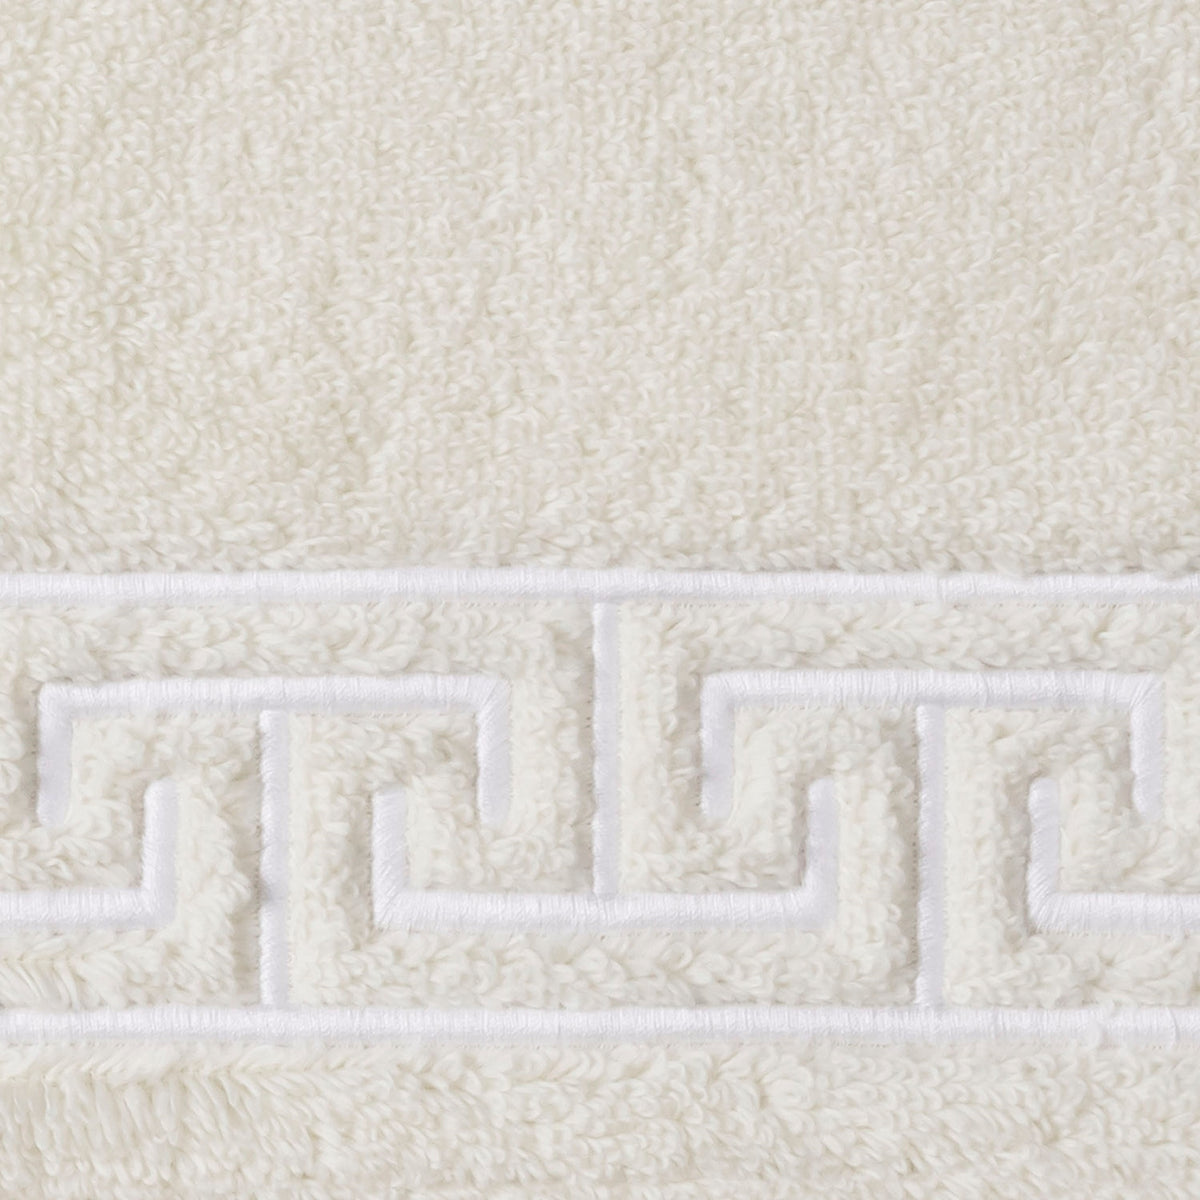 Swatch Sample of Matouk Adelphi Bath Rugs in Ivory Color